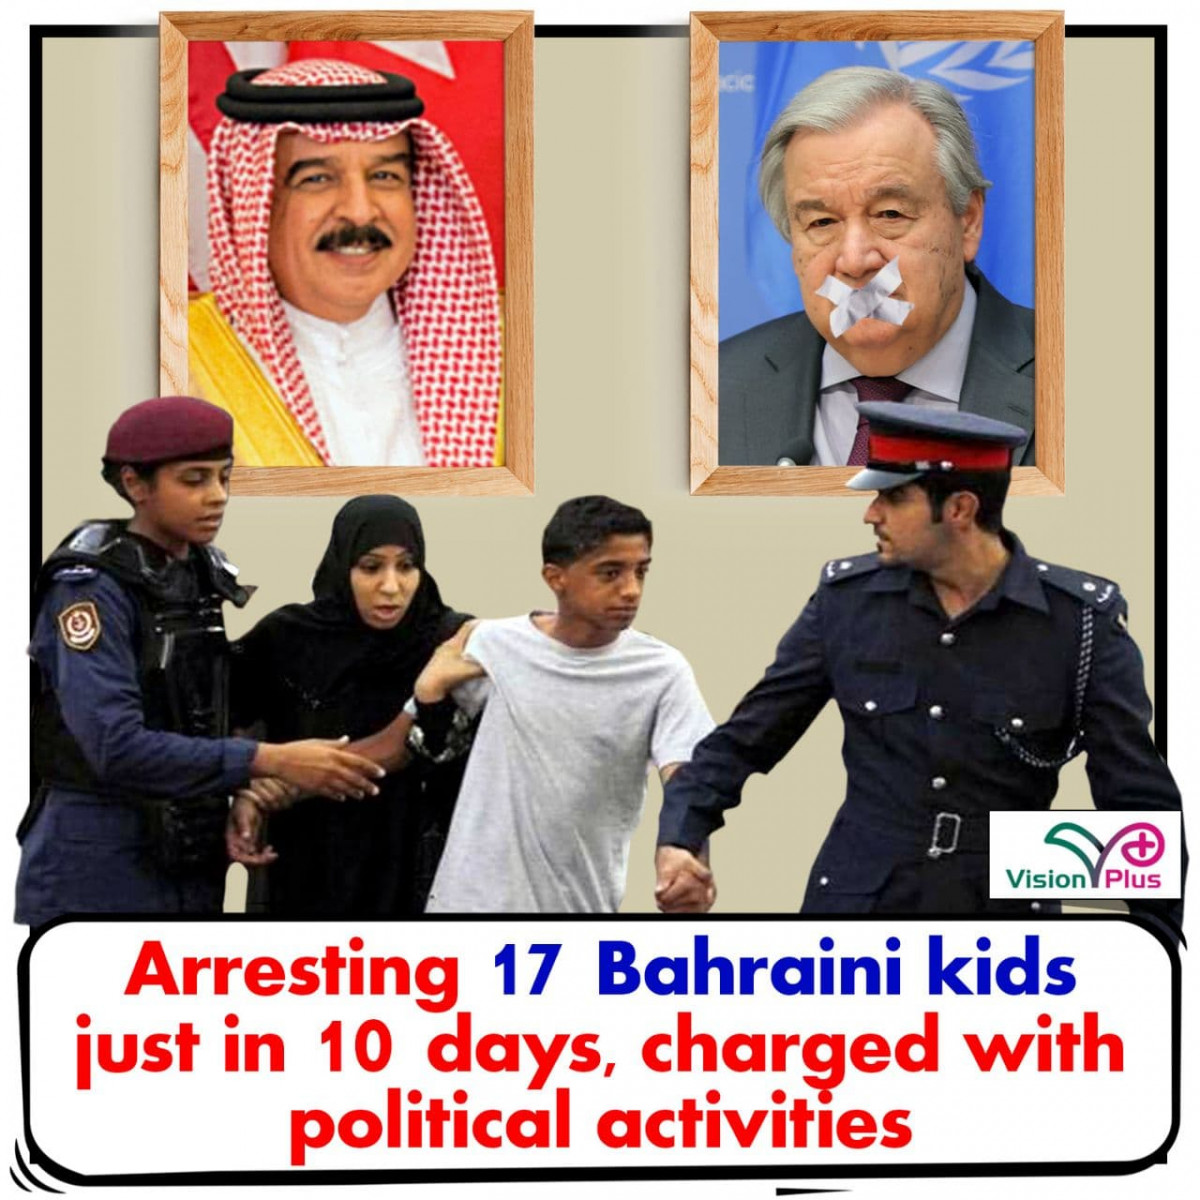 Arresting 17 Bahraini kids just in 10 days, charged with political activities